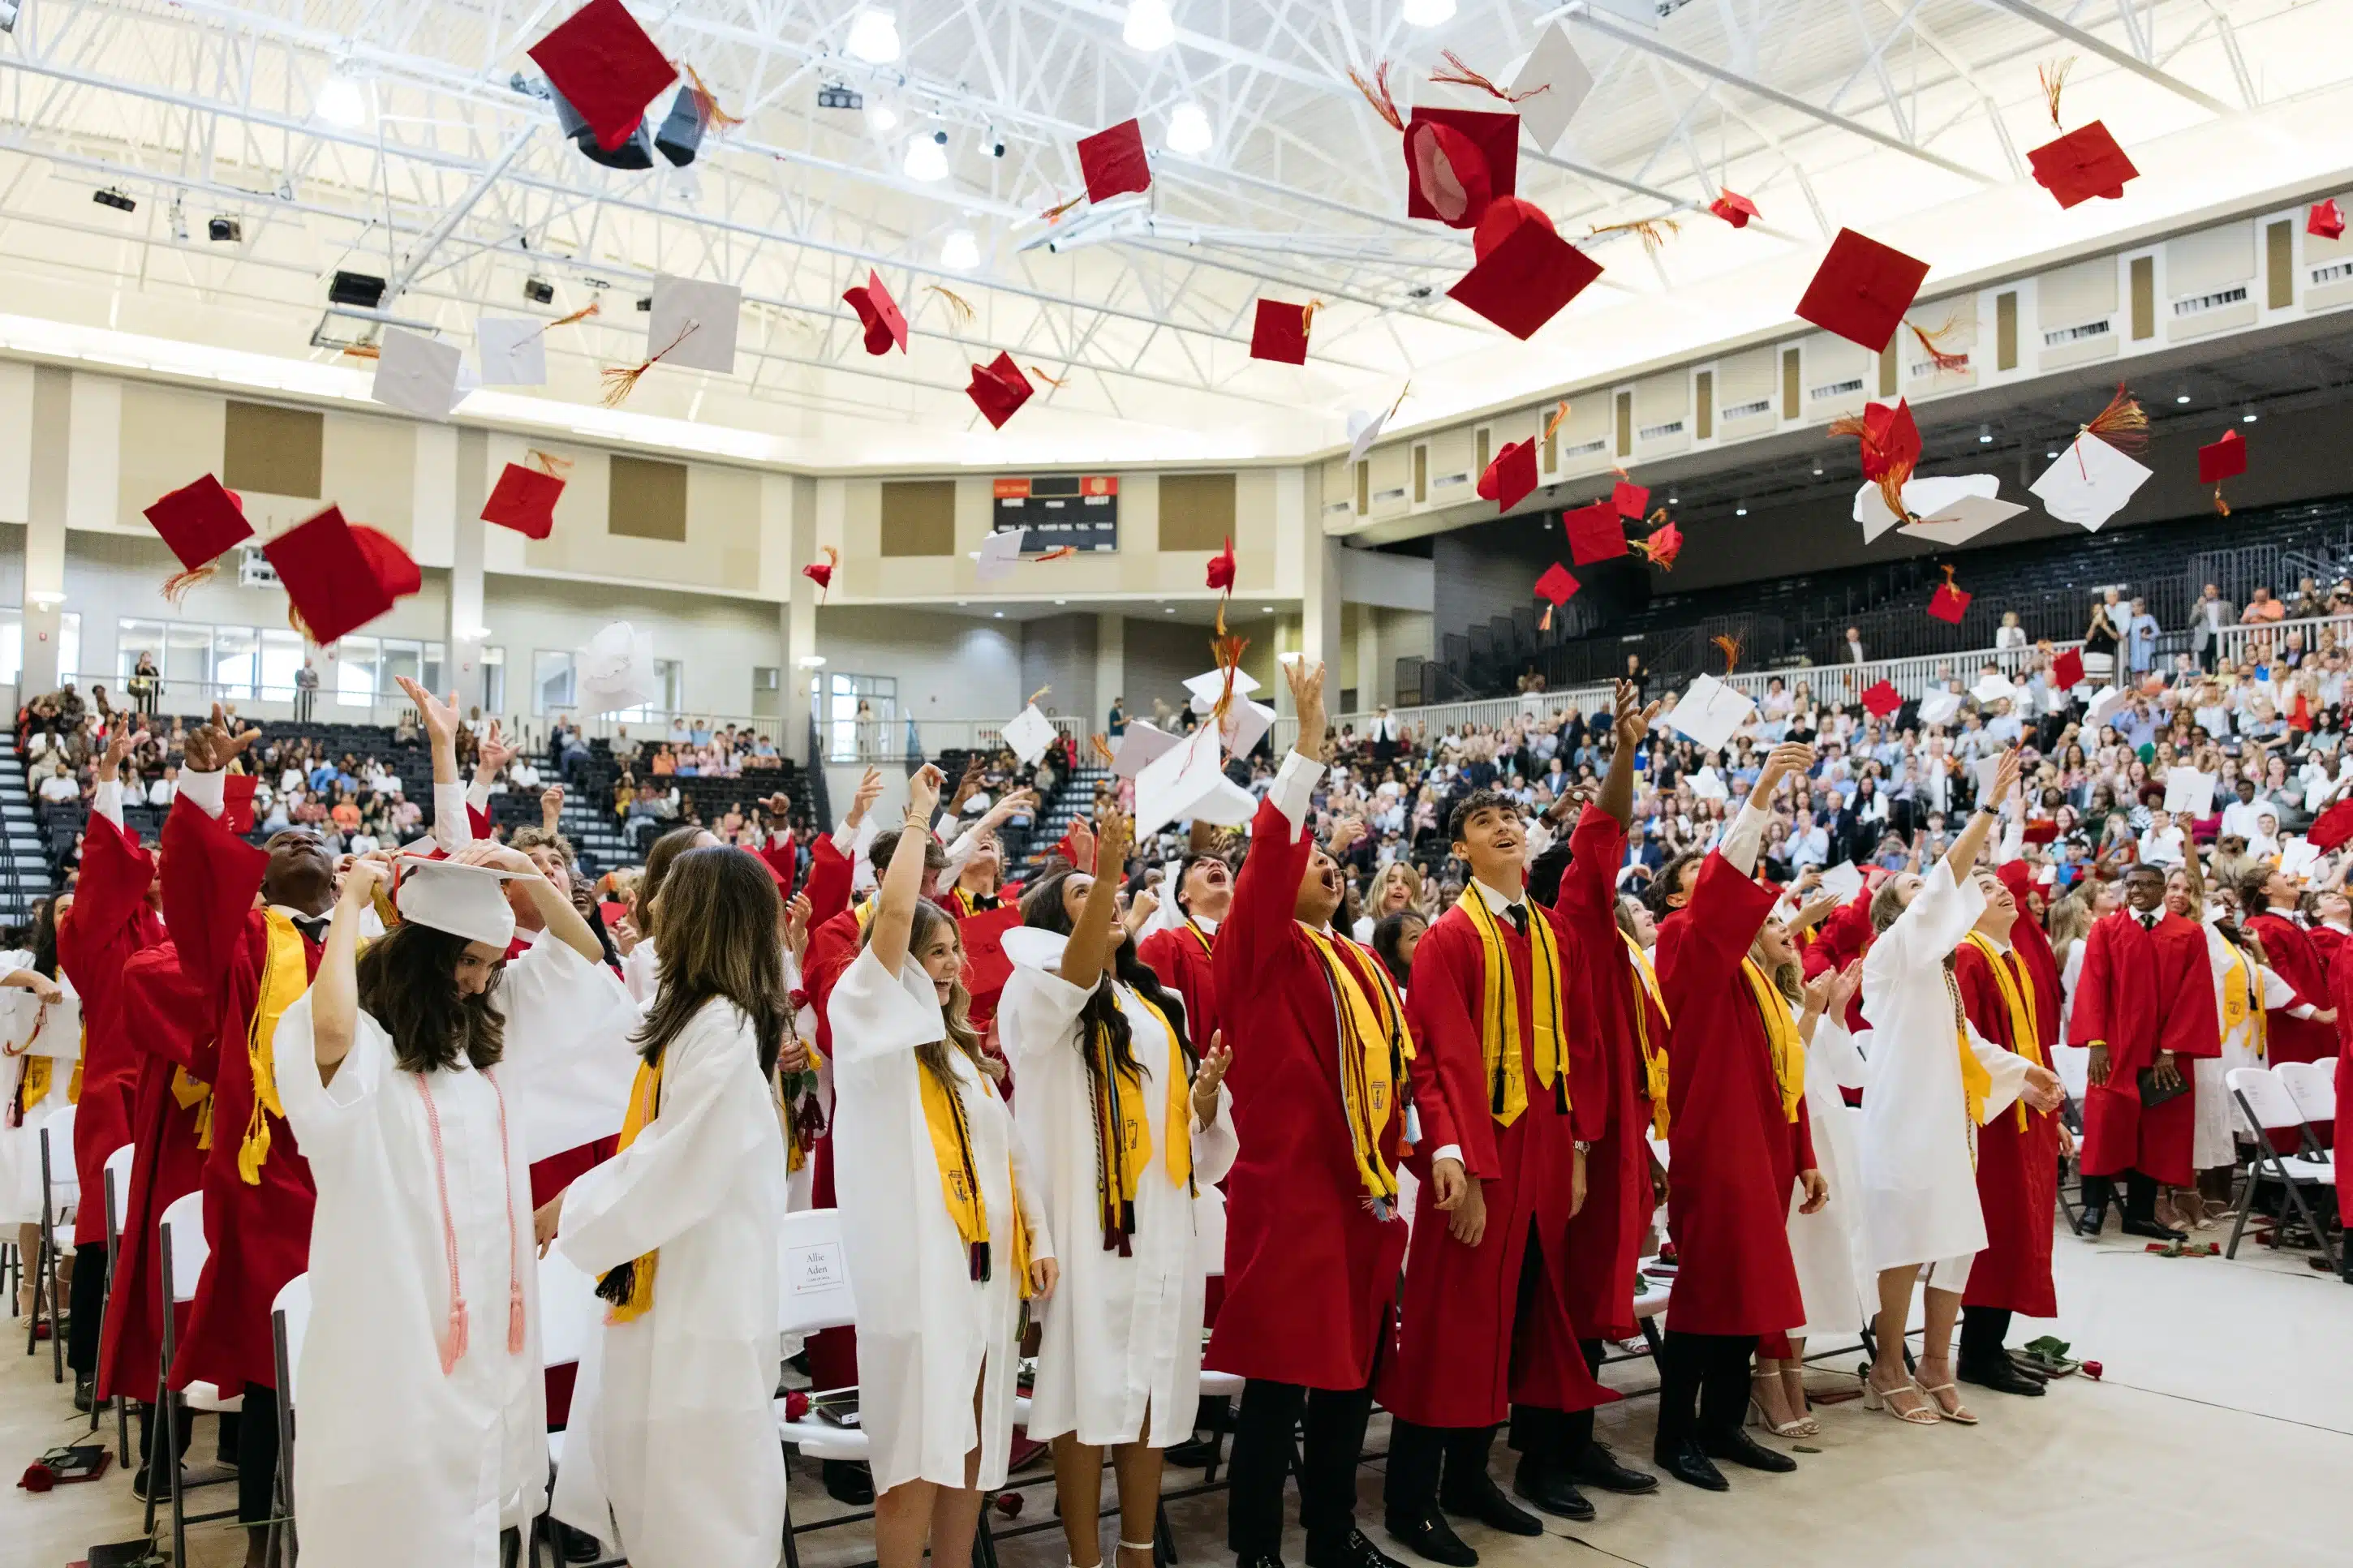 Greater Atlanta Christian School (GAC) held its commencement ceremony on campus on May 18 at the Long Forum.